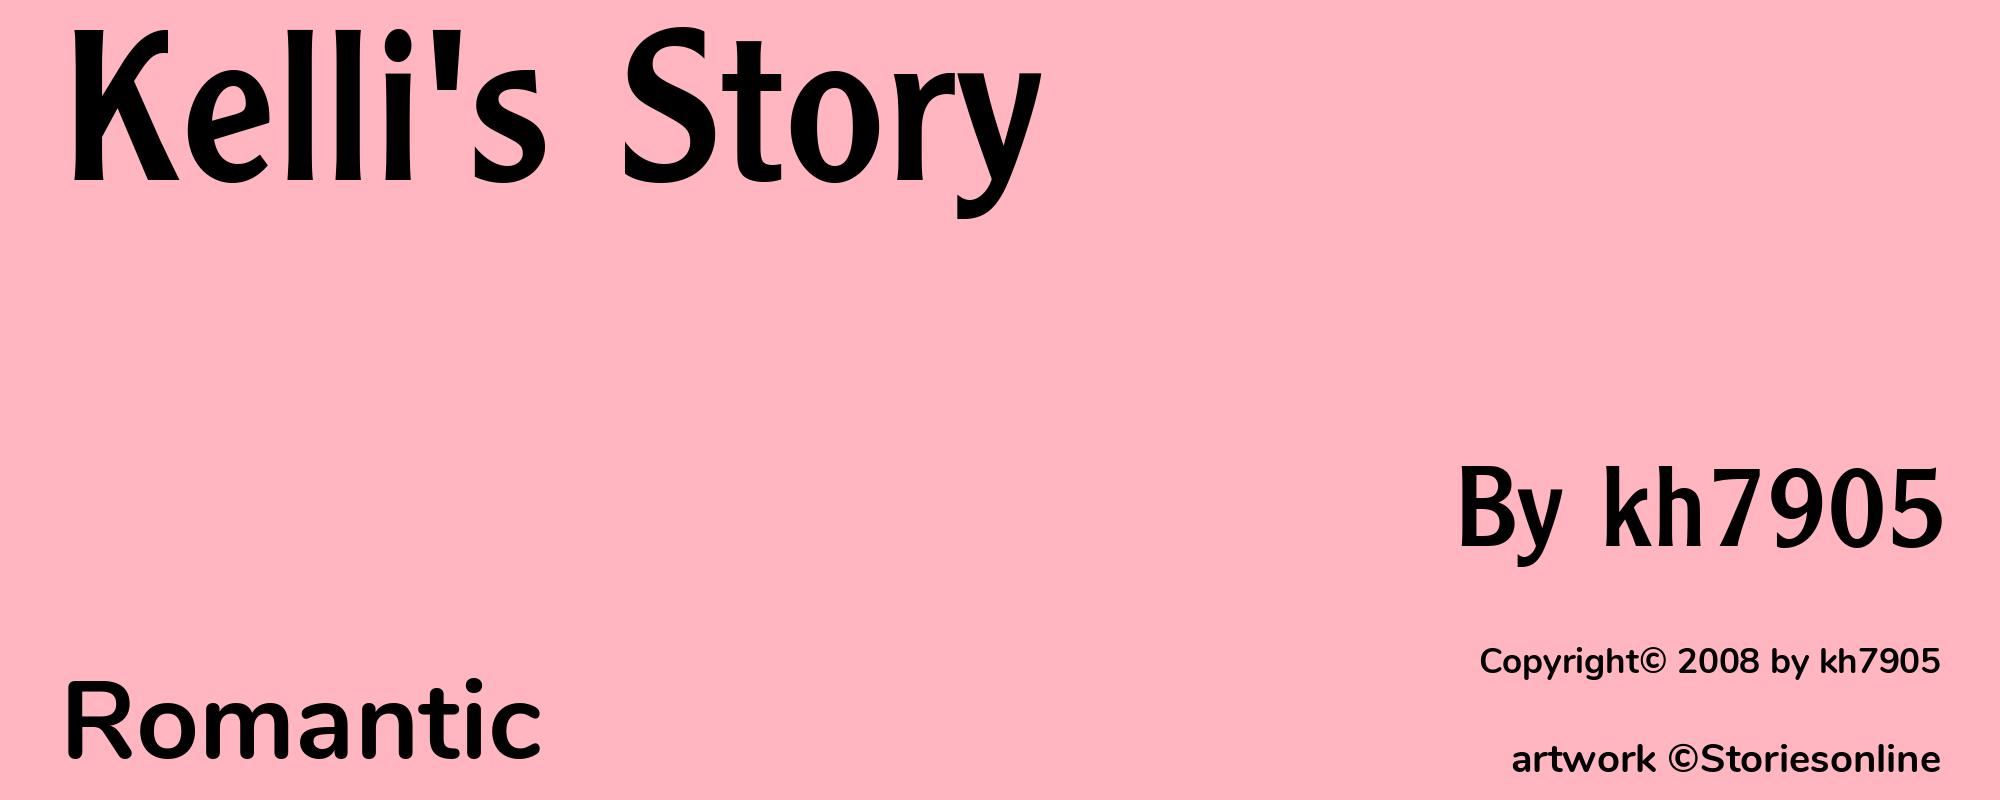 Kelli's Story - Cover